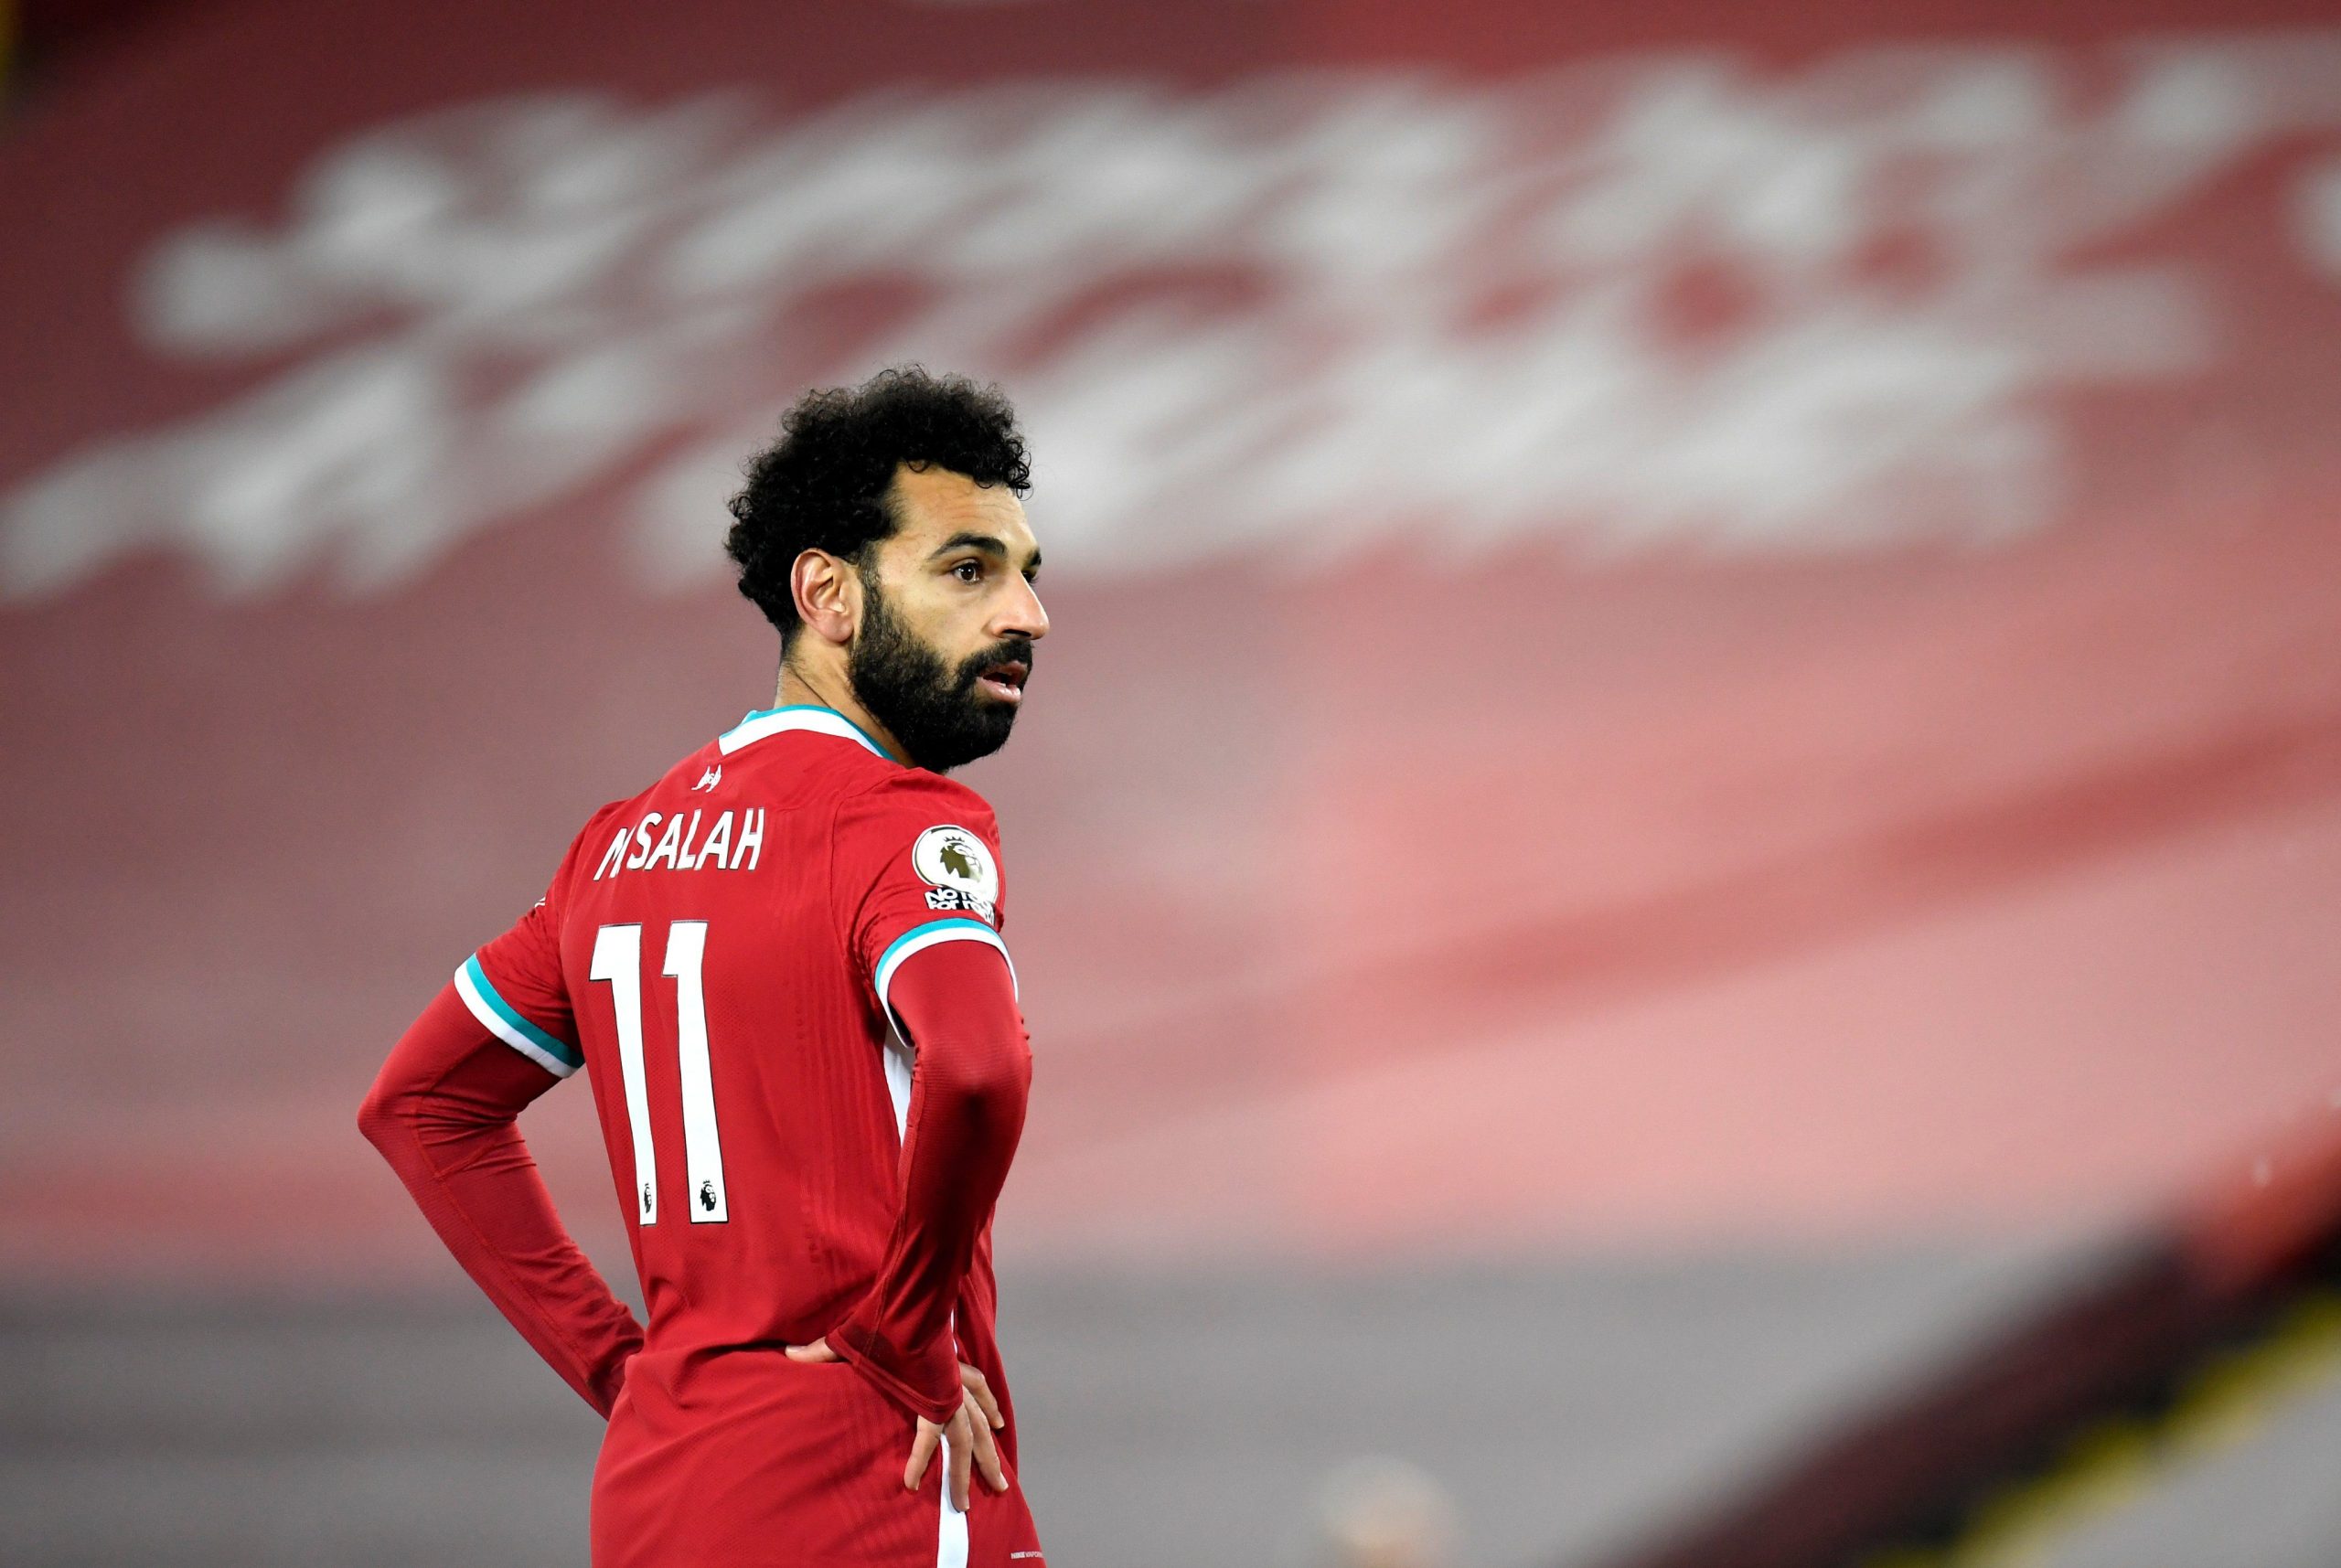 Gimme Mo: Salah to continue in Liverpool if contract is improved